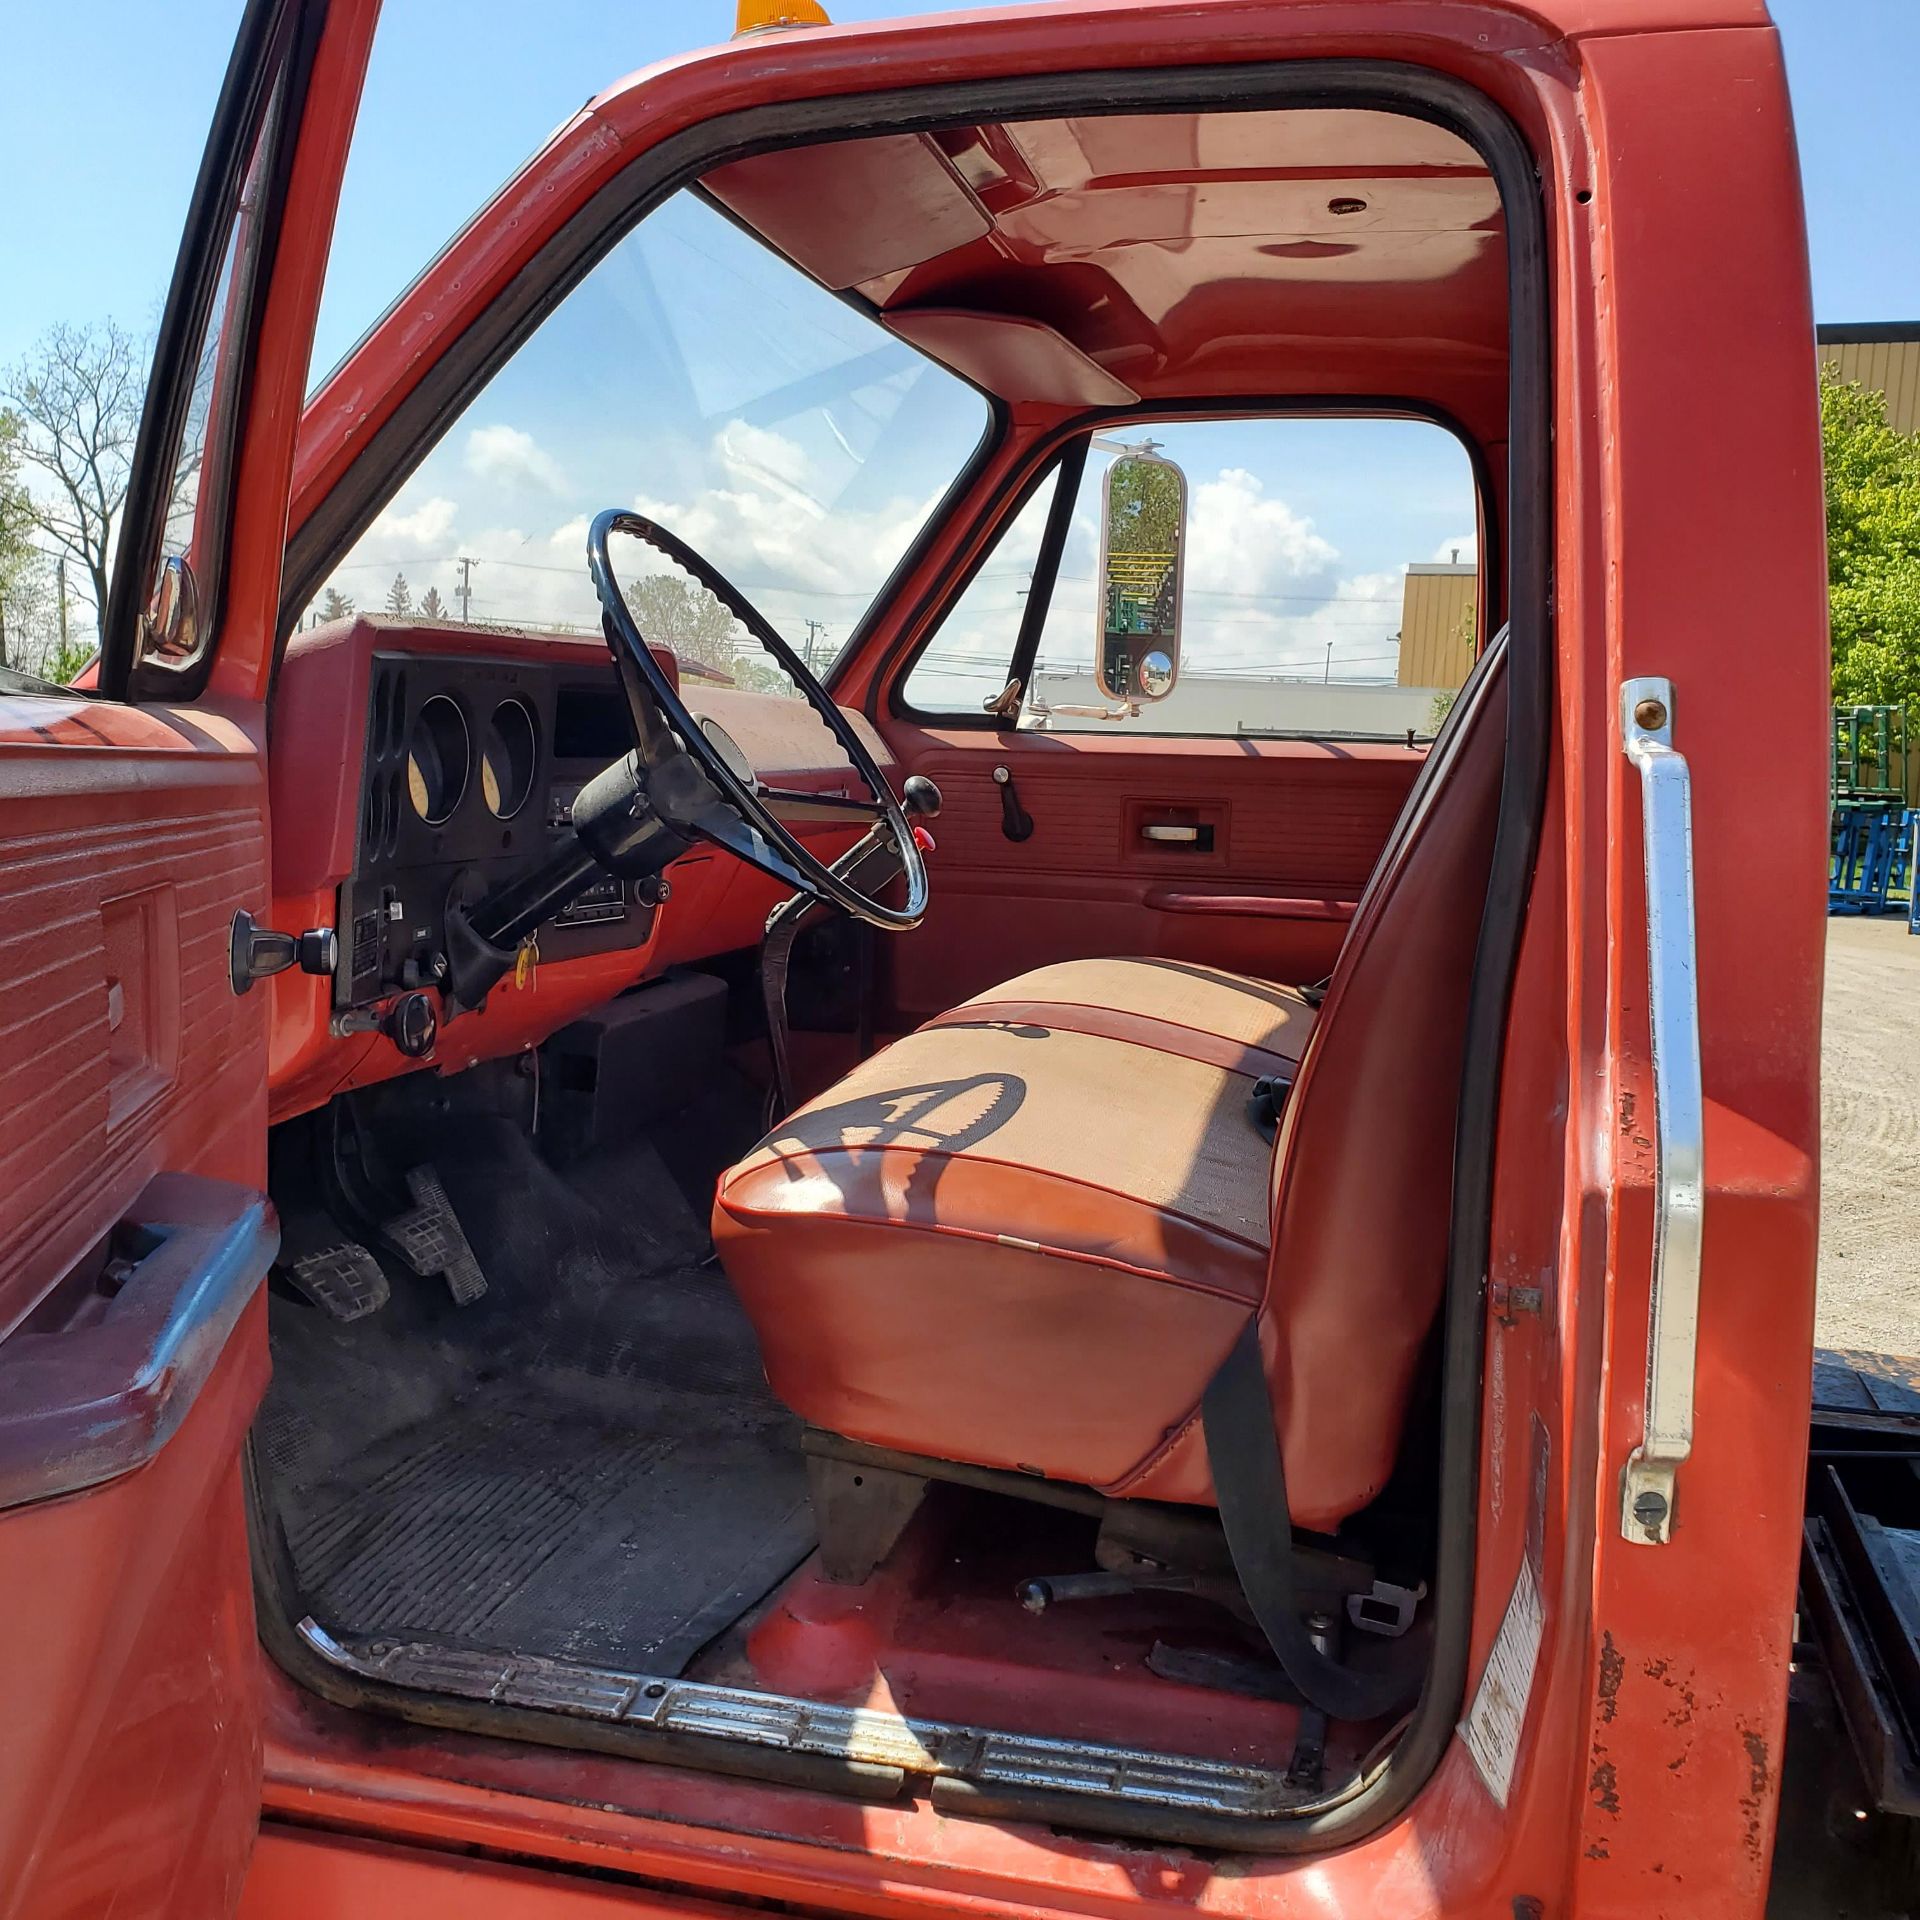 1977 Chevrolet C60 Cab and Chassis, Single Axle w/ Dual Tires and Tag Axle, 5 Speed Transmission - Image 9 of 19